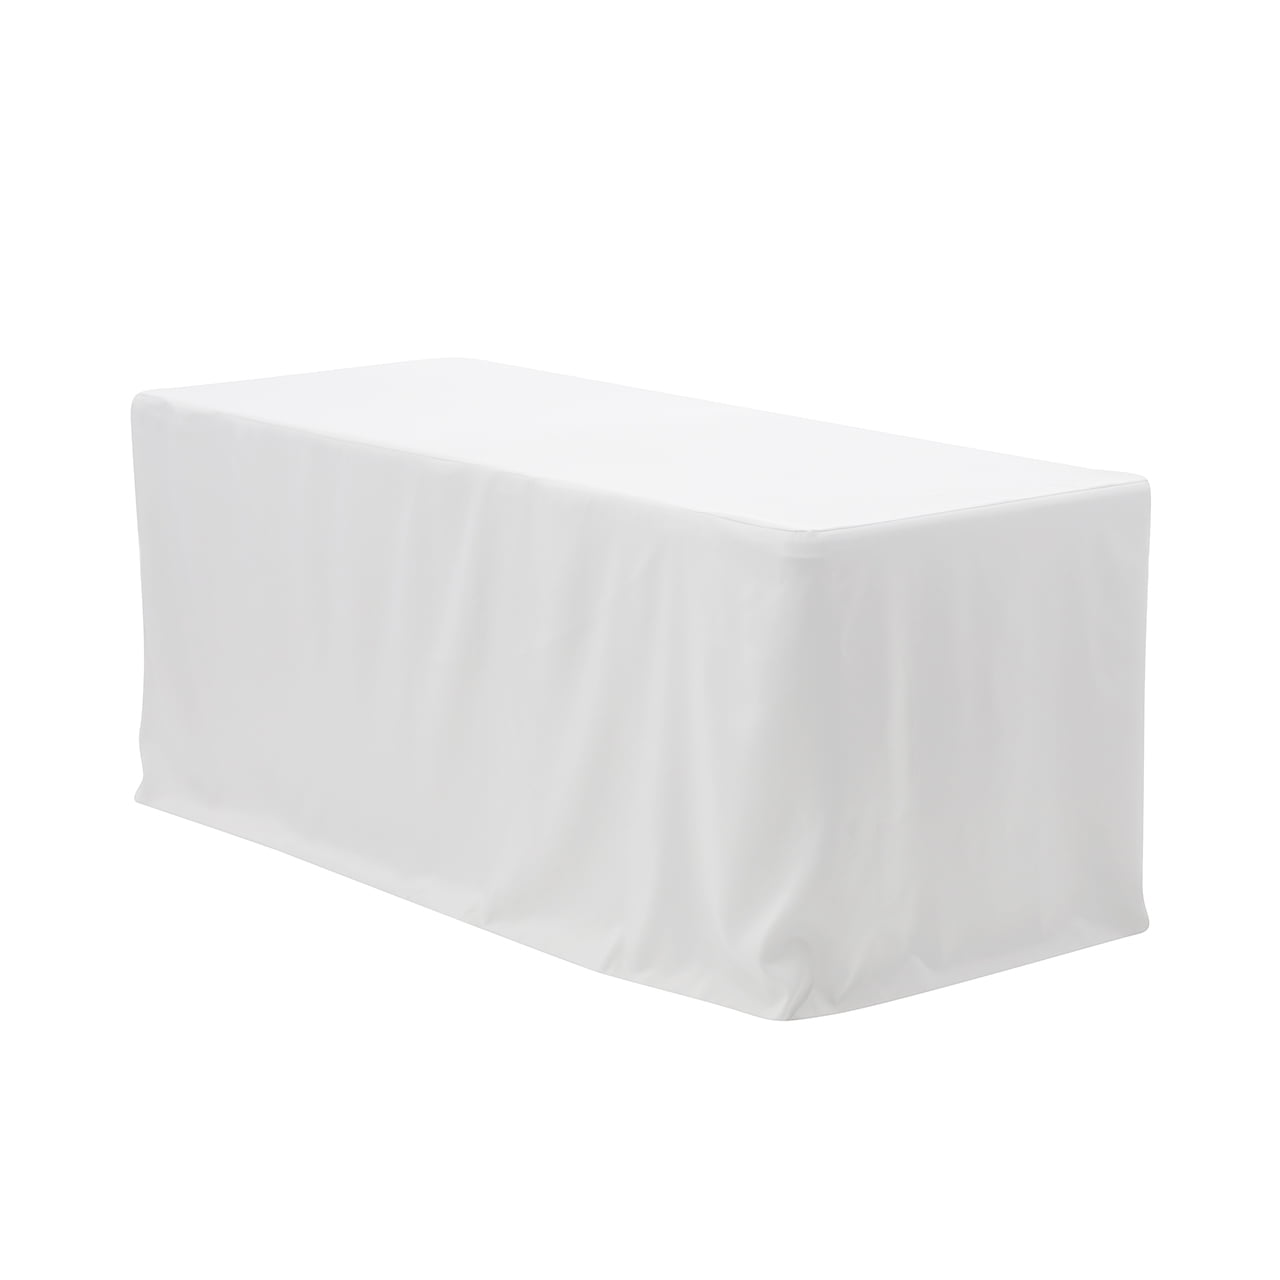 6 Ft Fitted Polyester Tablecloth, What Size Tablecloth For 6 Ft Banquet Table